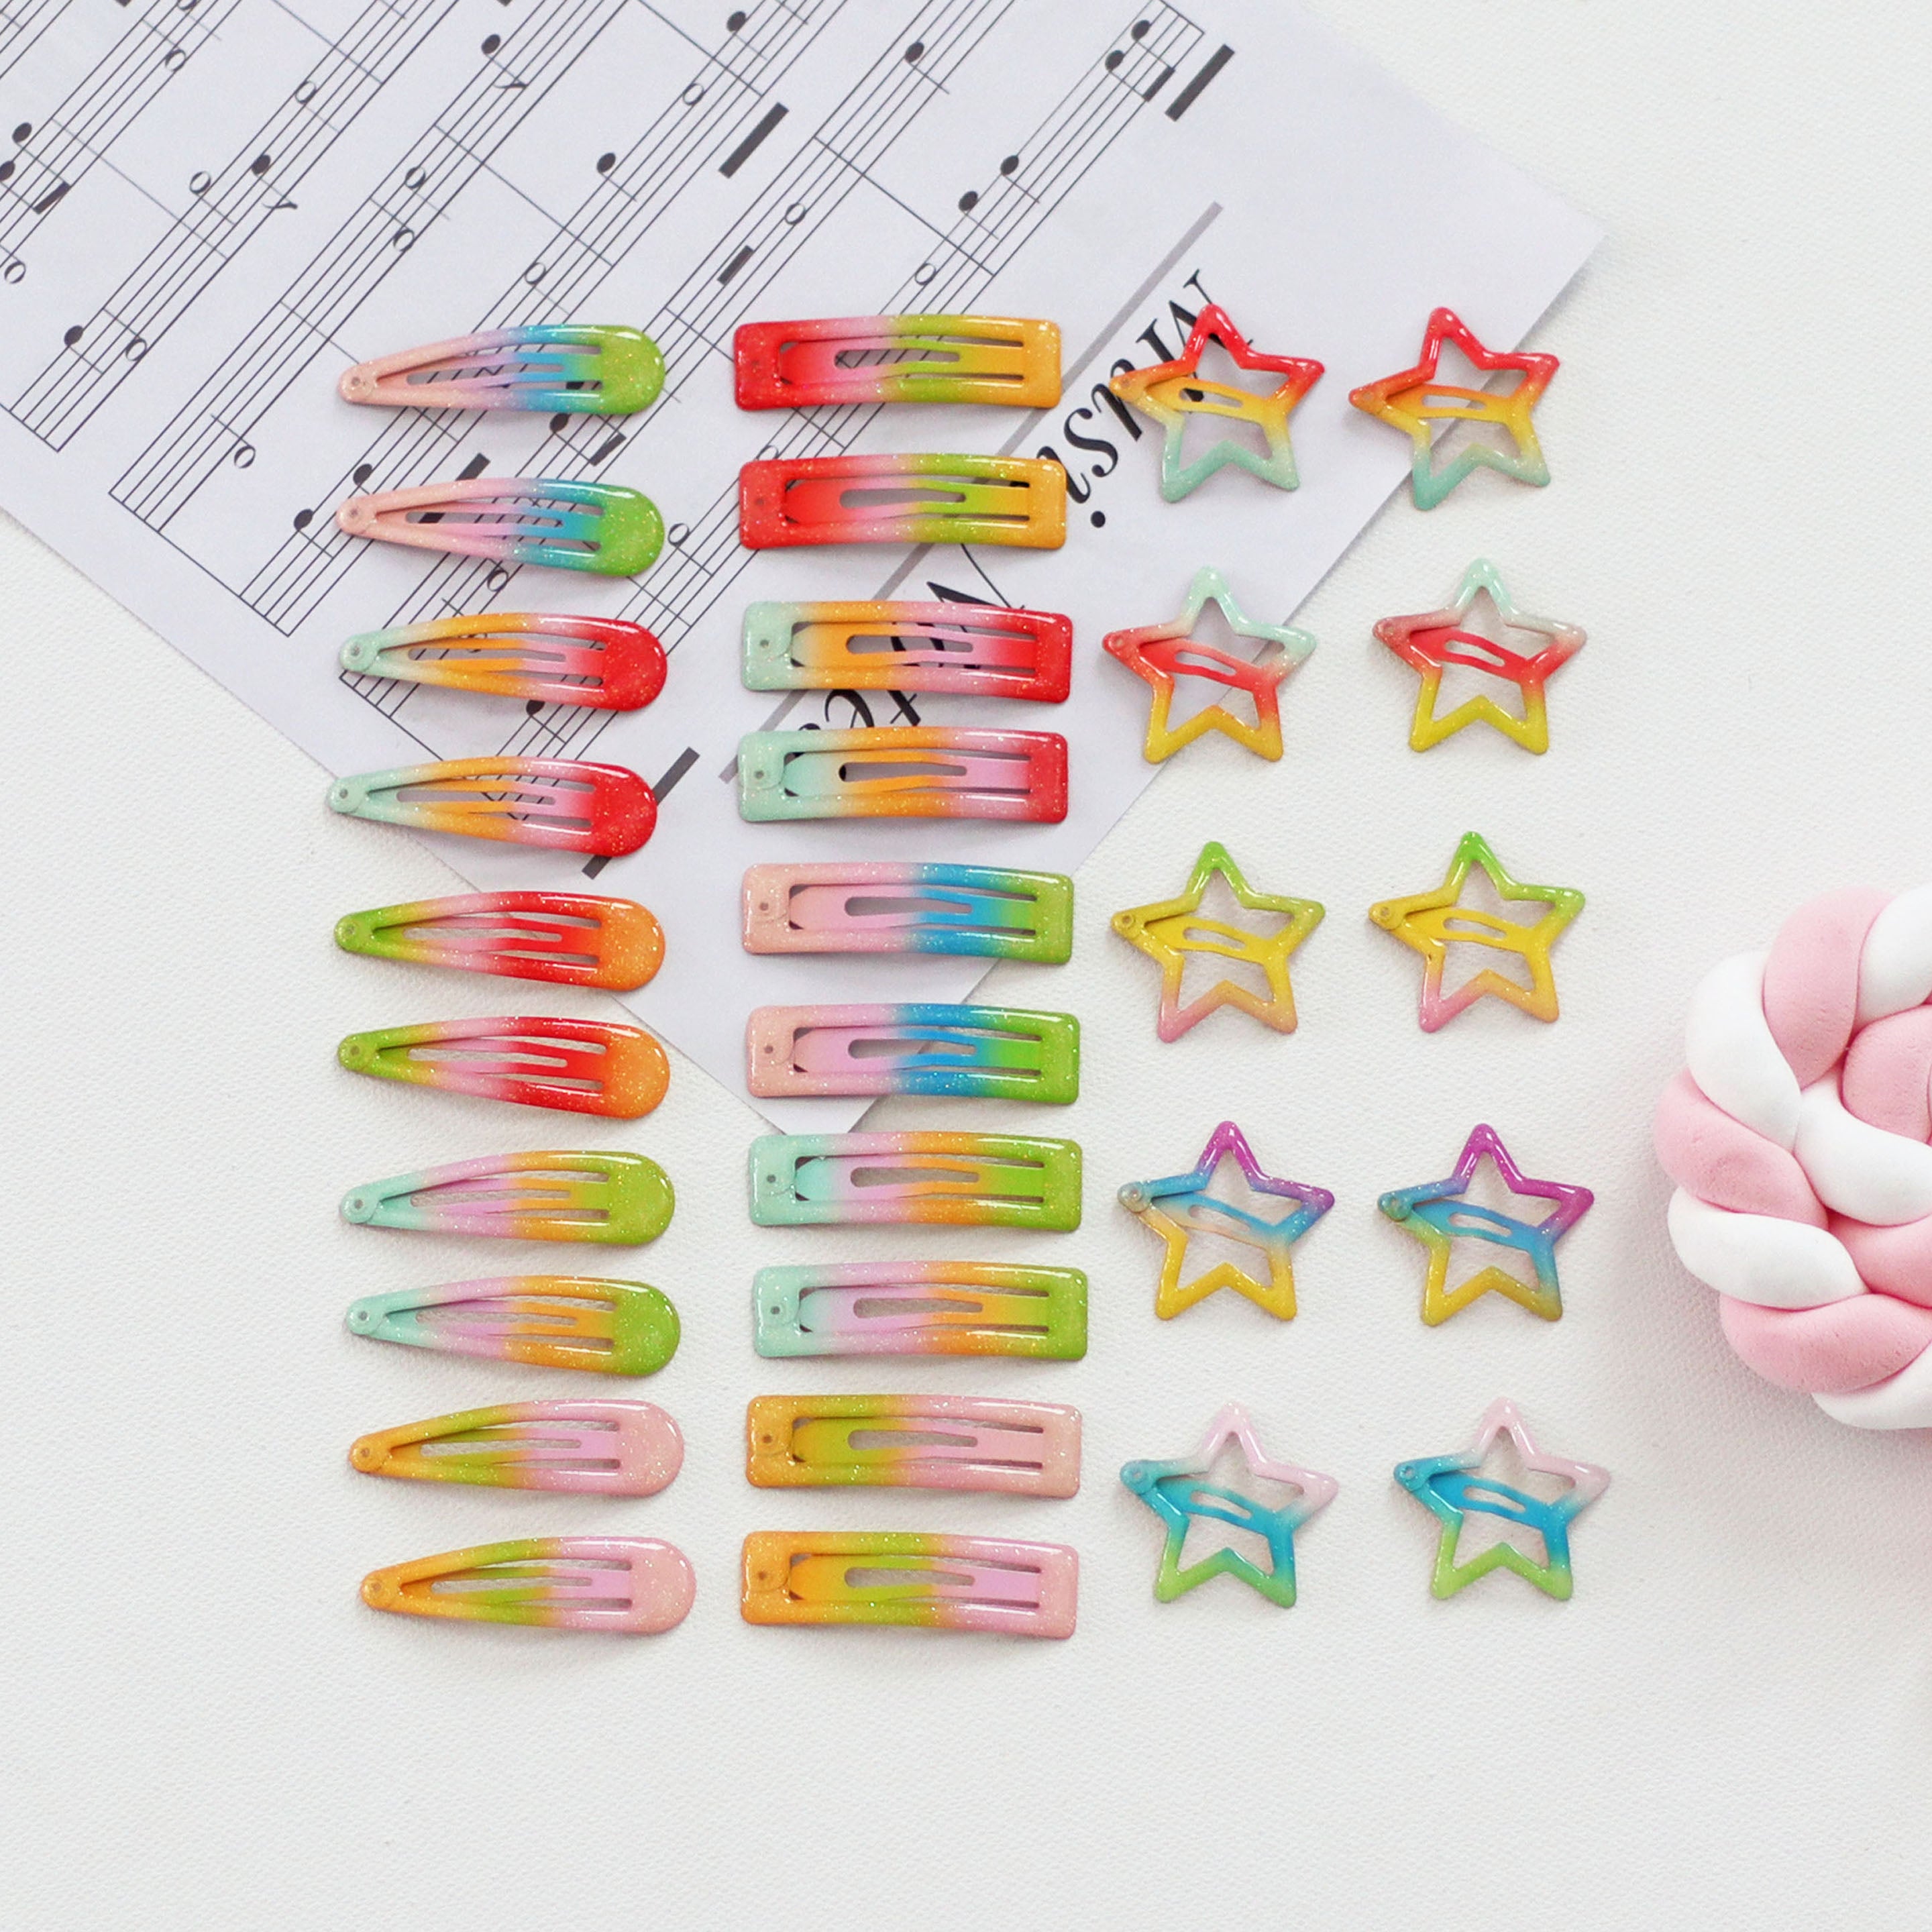 Summer Crystal 30Pcs 2 Inch Barrettes Metal Snap Hair Clips For Girls - Rainbow Gradient